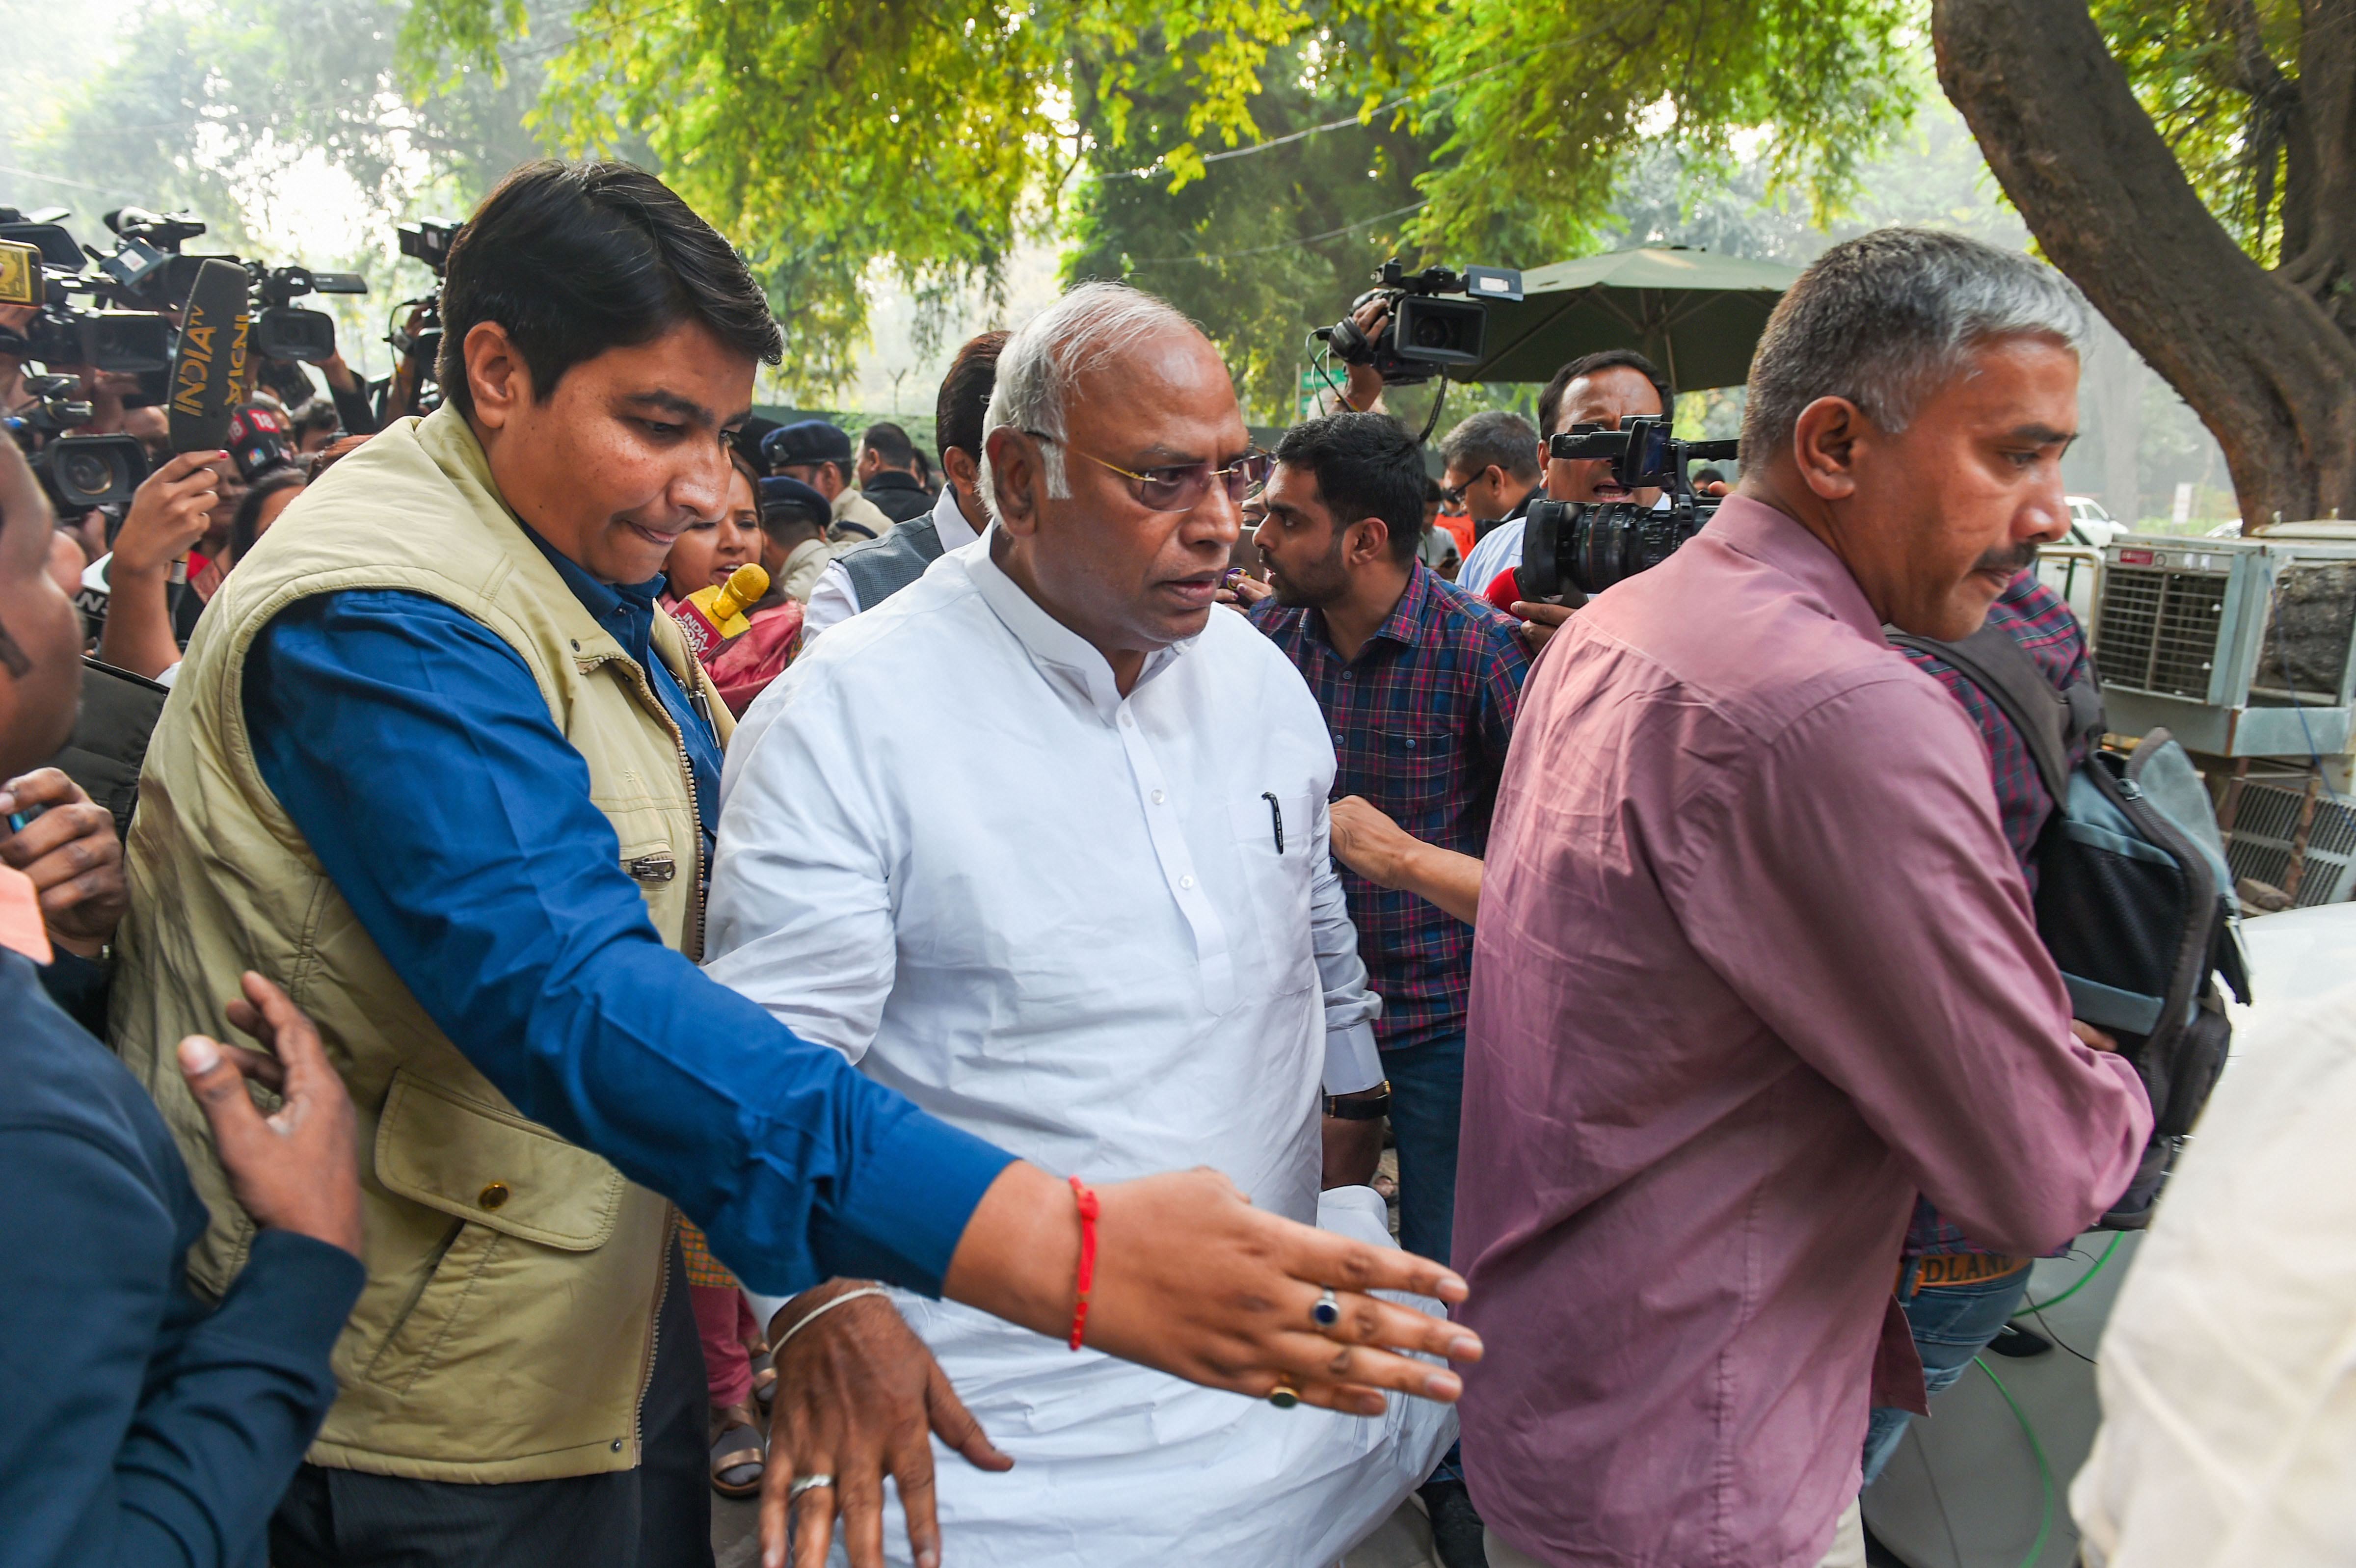 AICC general secretary in-charge for Maharashtra Mallikarjun Kharge leaves after a meeting of the Congress Working Committee at 10 Janpath, in New Delhi, Monday, November 11, 2019.